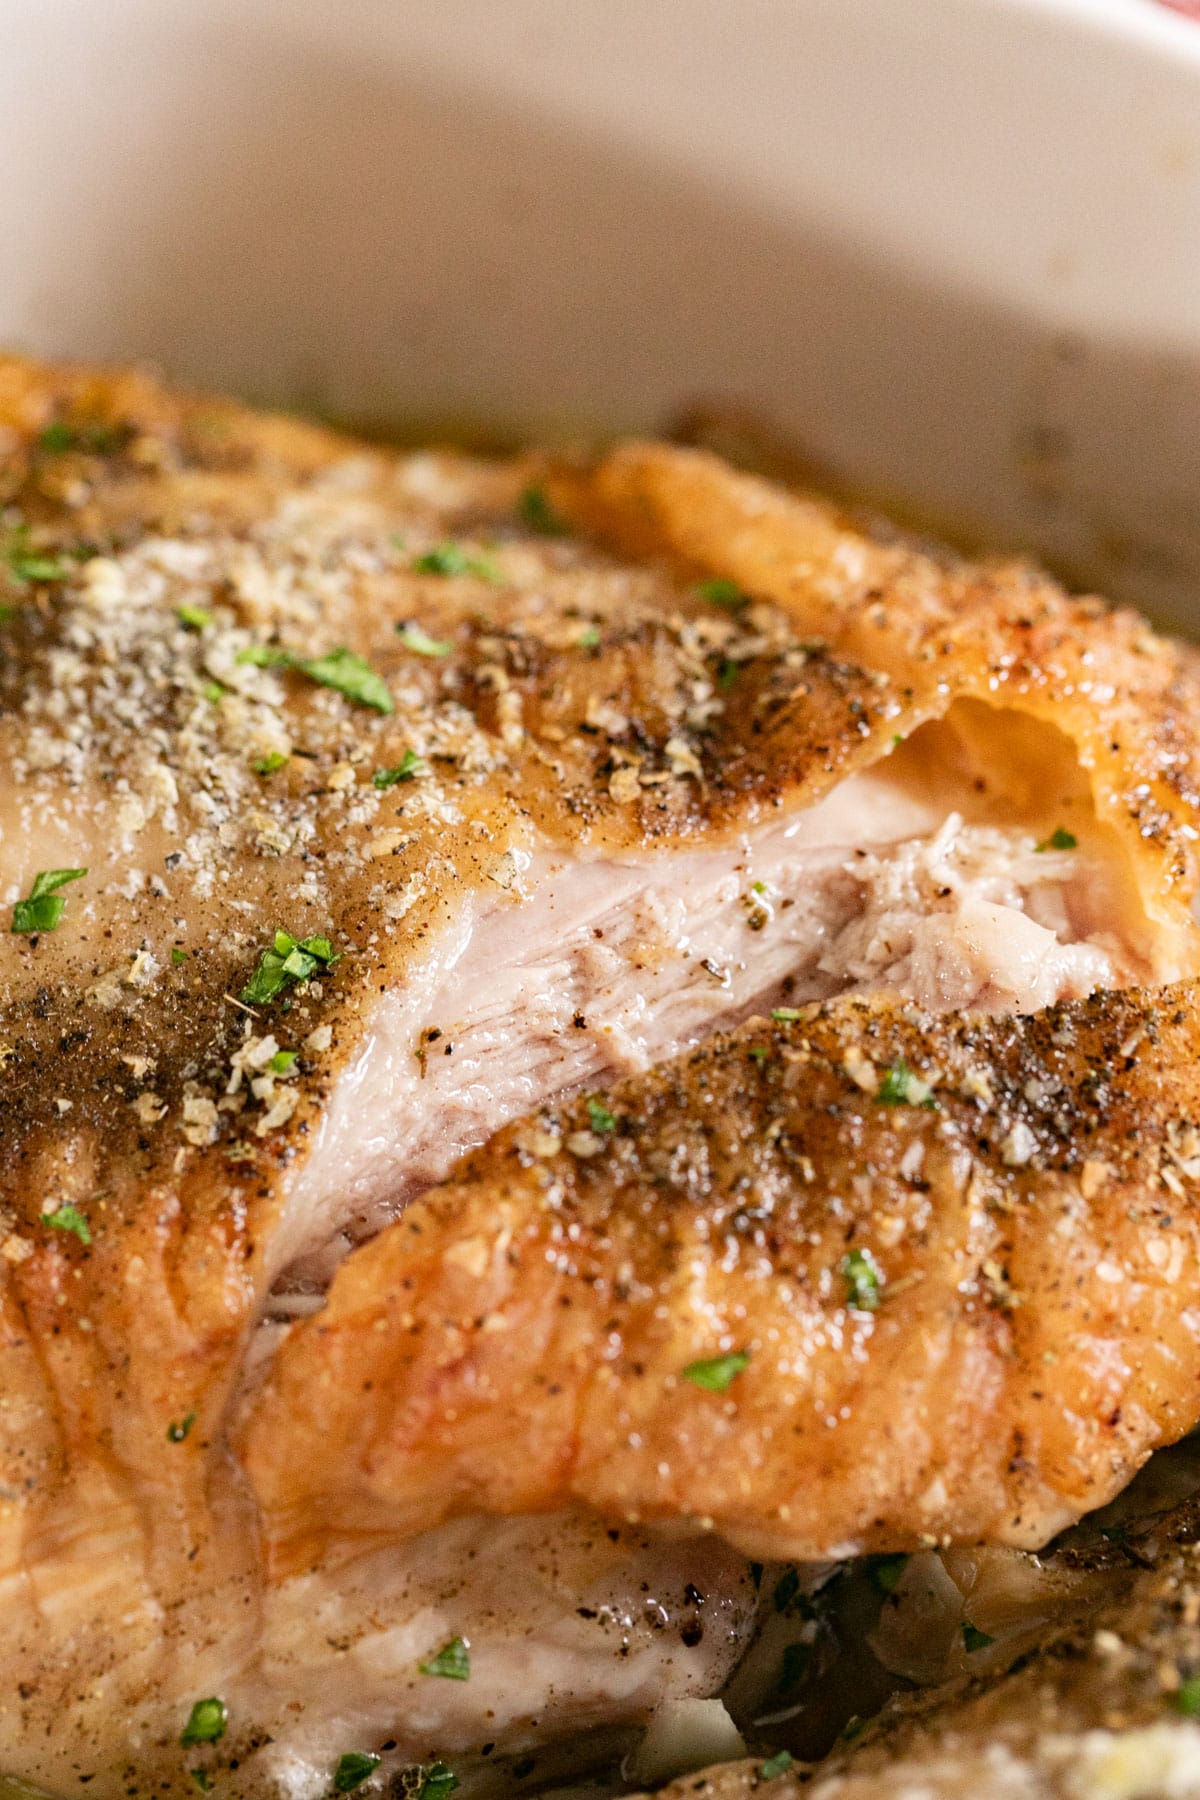 A close up image of the top of a turkey thigh cut into exposing the juicy, perfectly cooked meat inside.